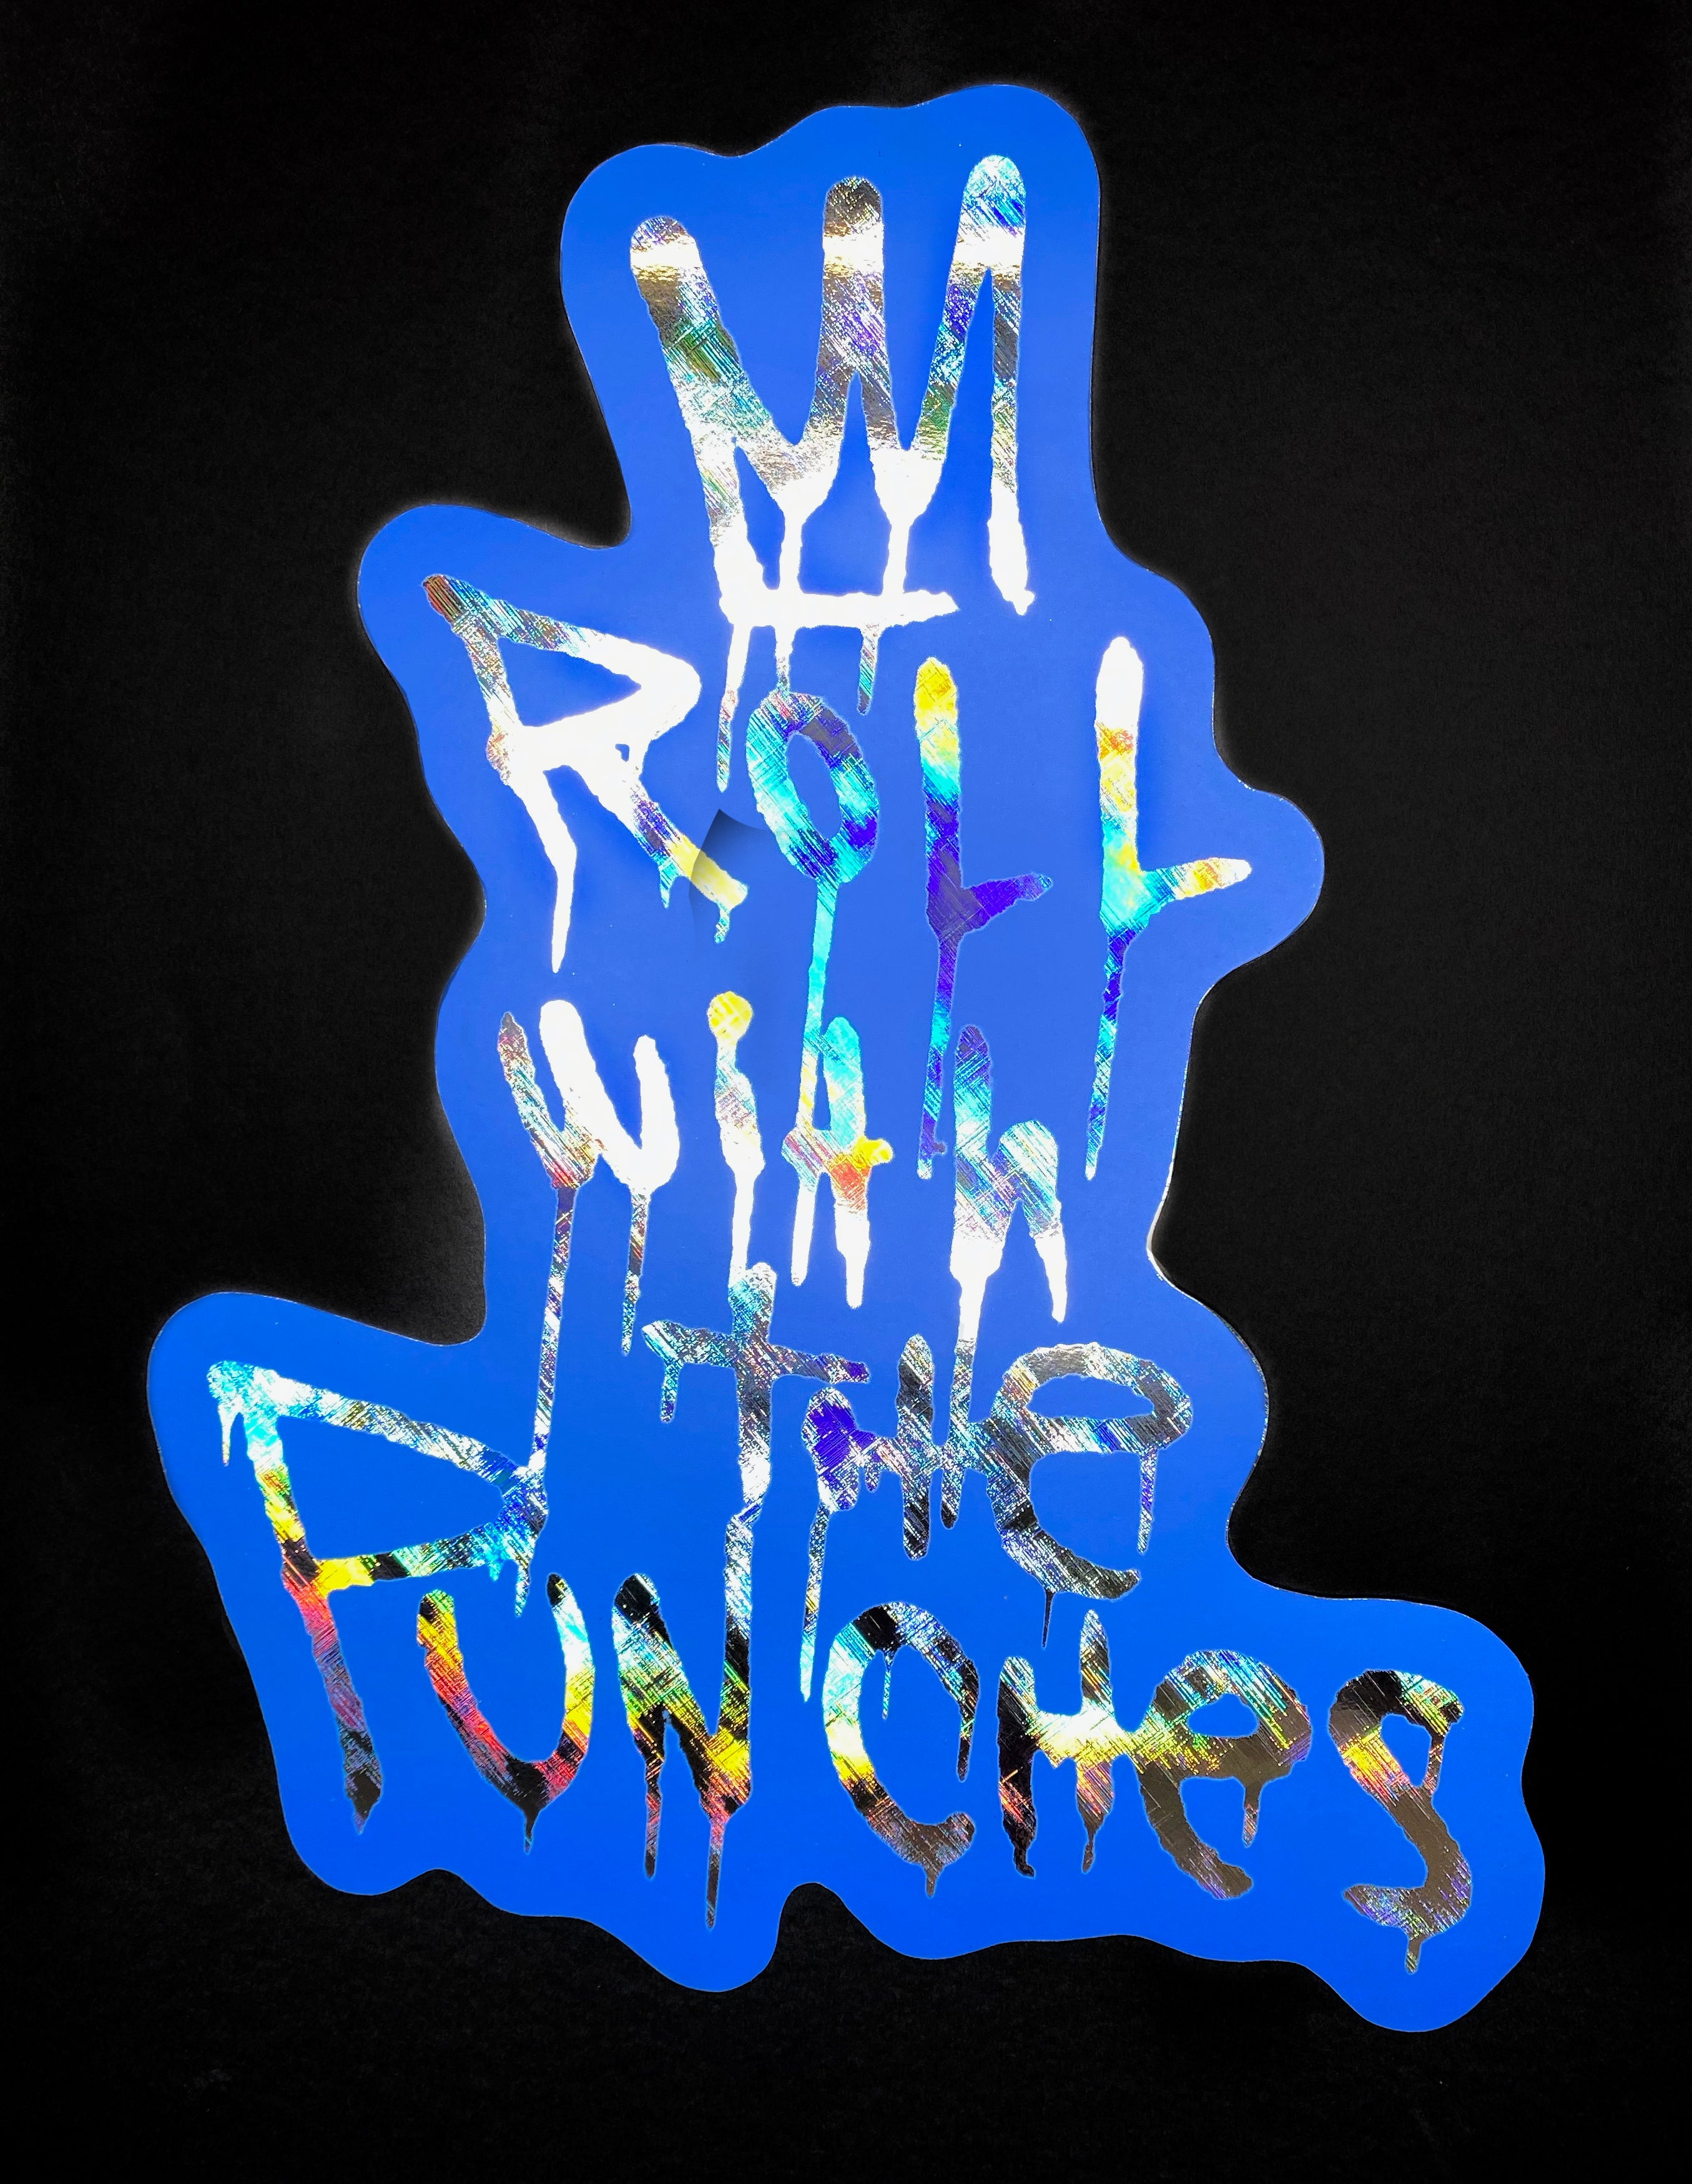 "Roll With the Punches Foil Blue" by JC Rivera